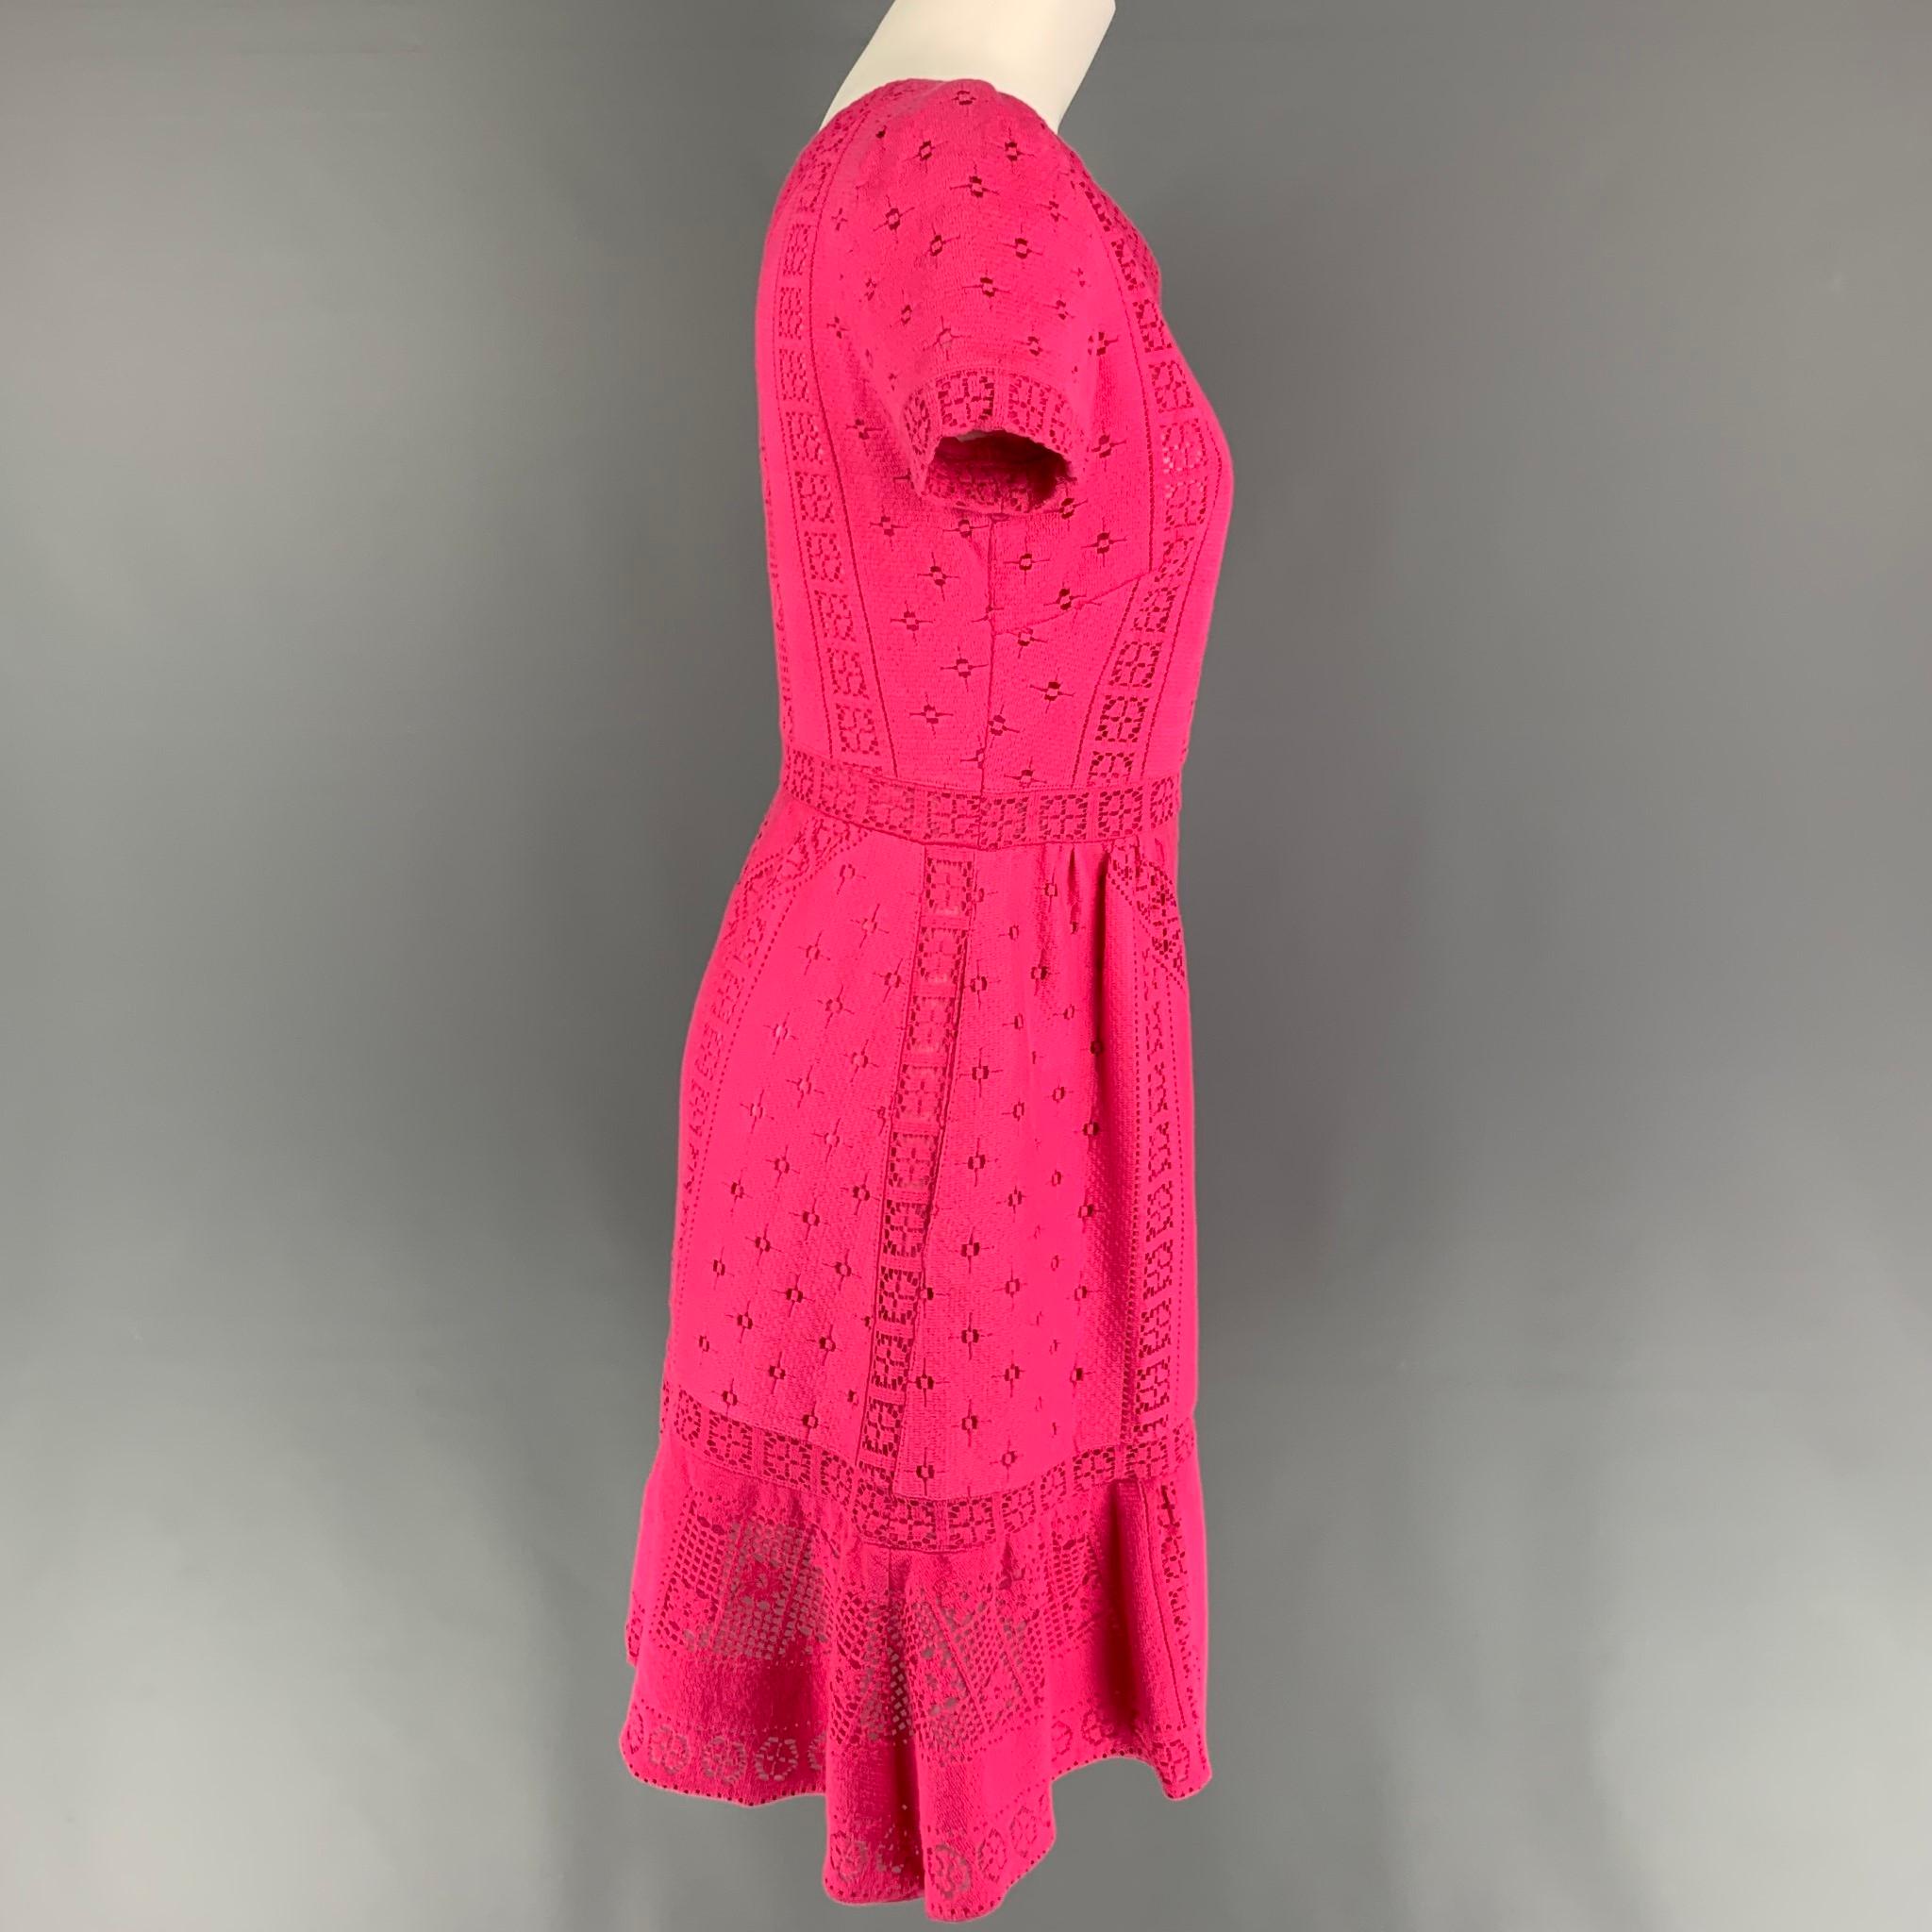 VALENTINO dress comes in a pink lace cotton / nylon with a slip liner featuring an a-line style, short sleeves, slit pockets, v-neck, and a side zipper closure. Made in Italy. 

Very Good Pre-Owned Condition.
Marked: 4

Measurements:

Shoulder: 14.5